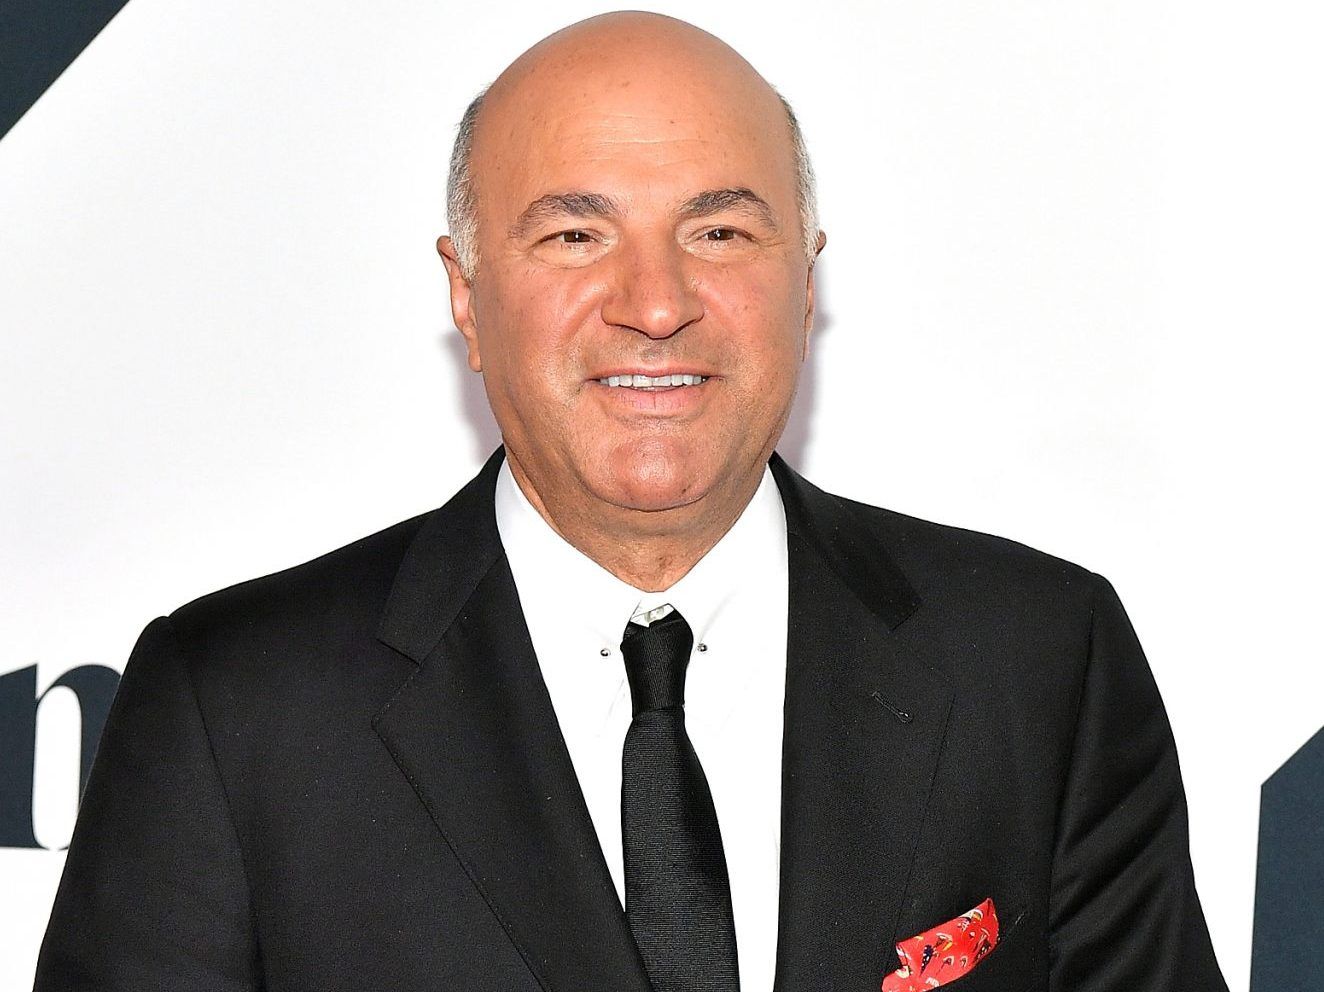 Kevin O'Leary blasts Target and Bud Light's woke marketing moves